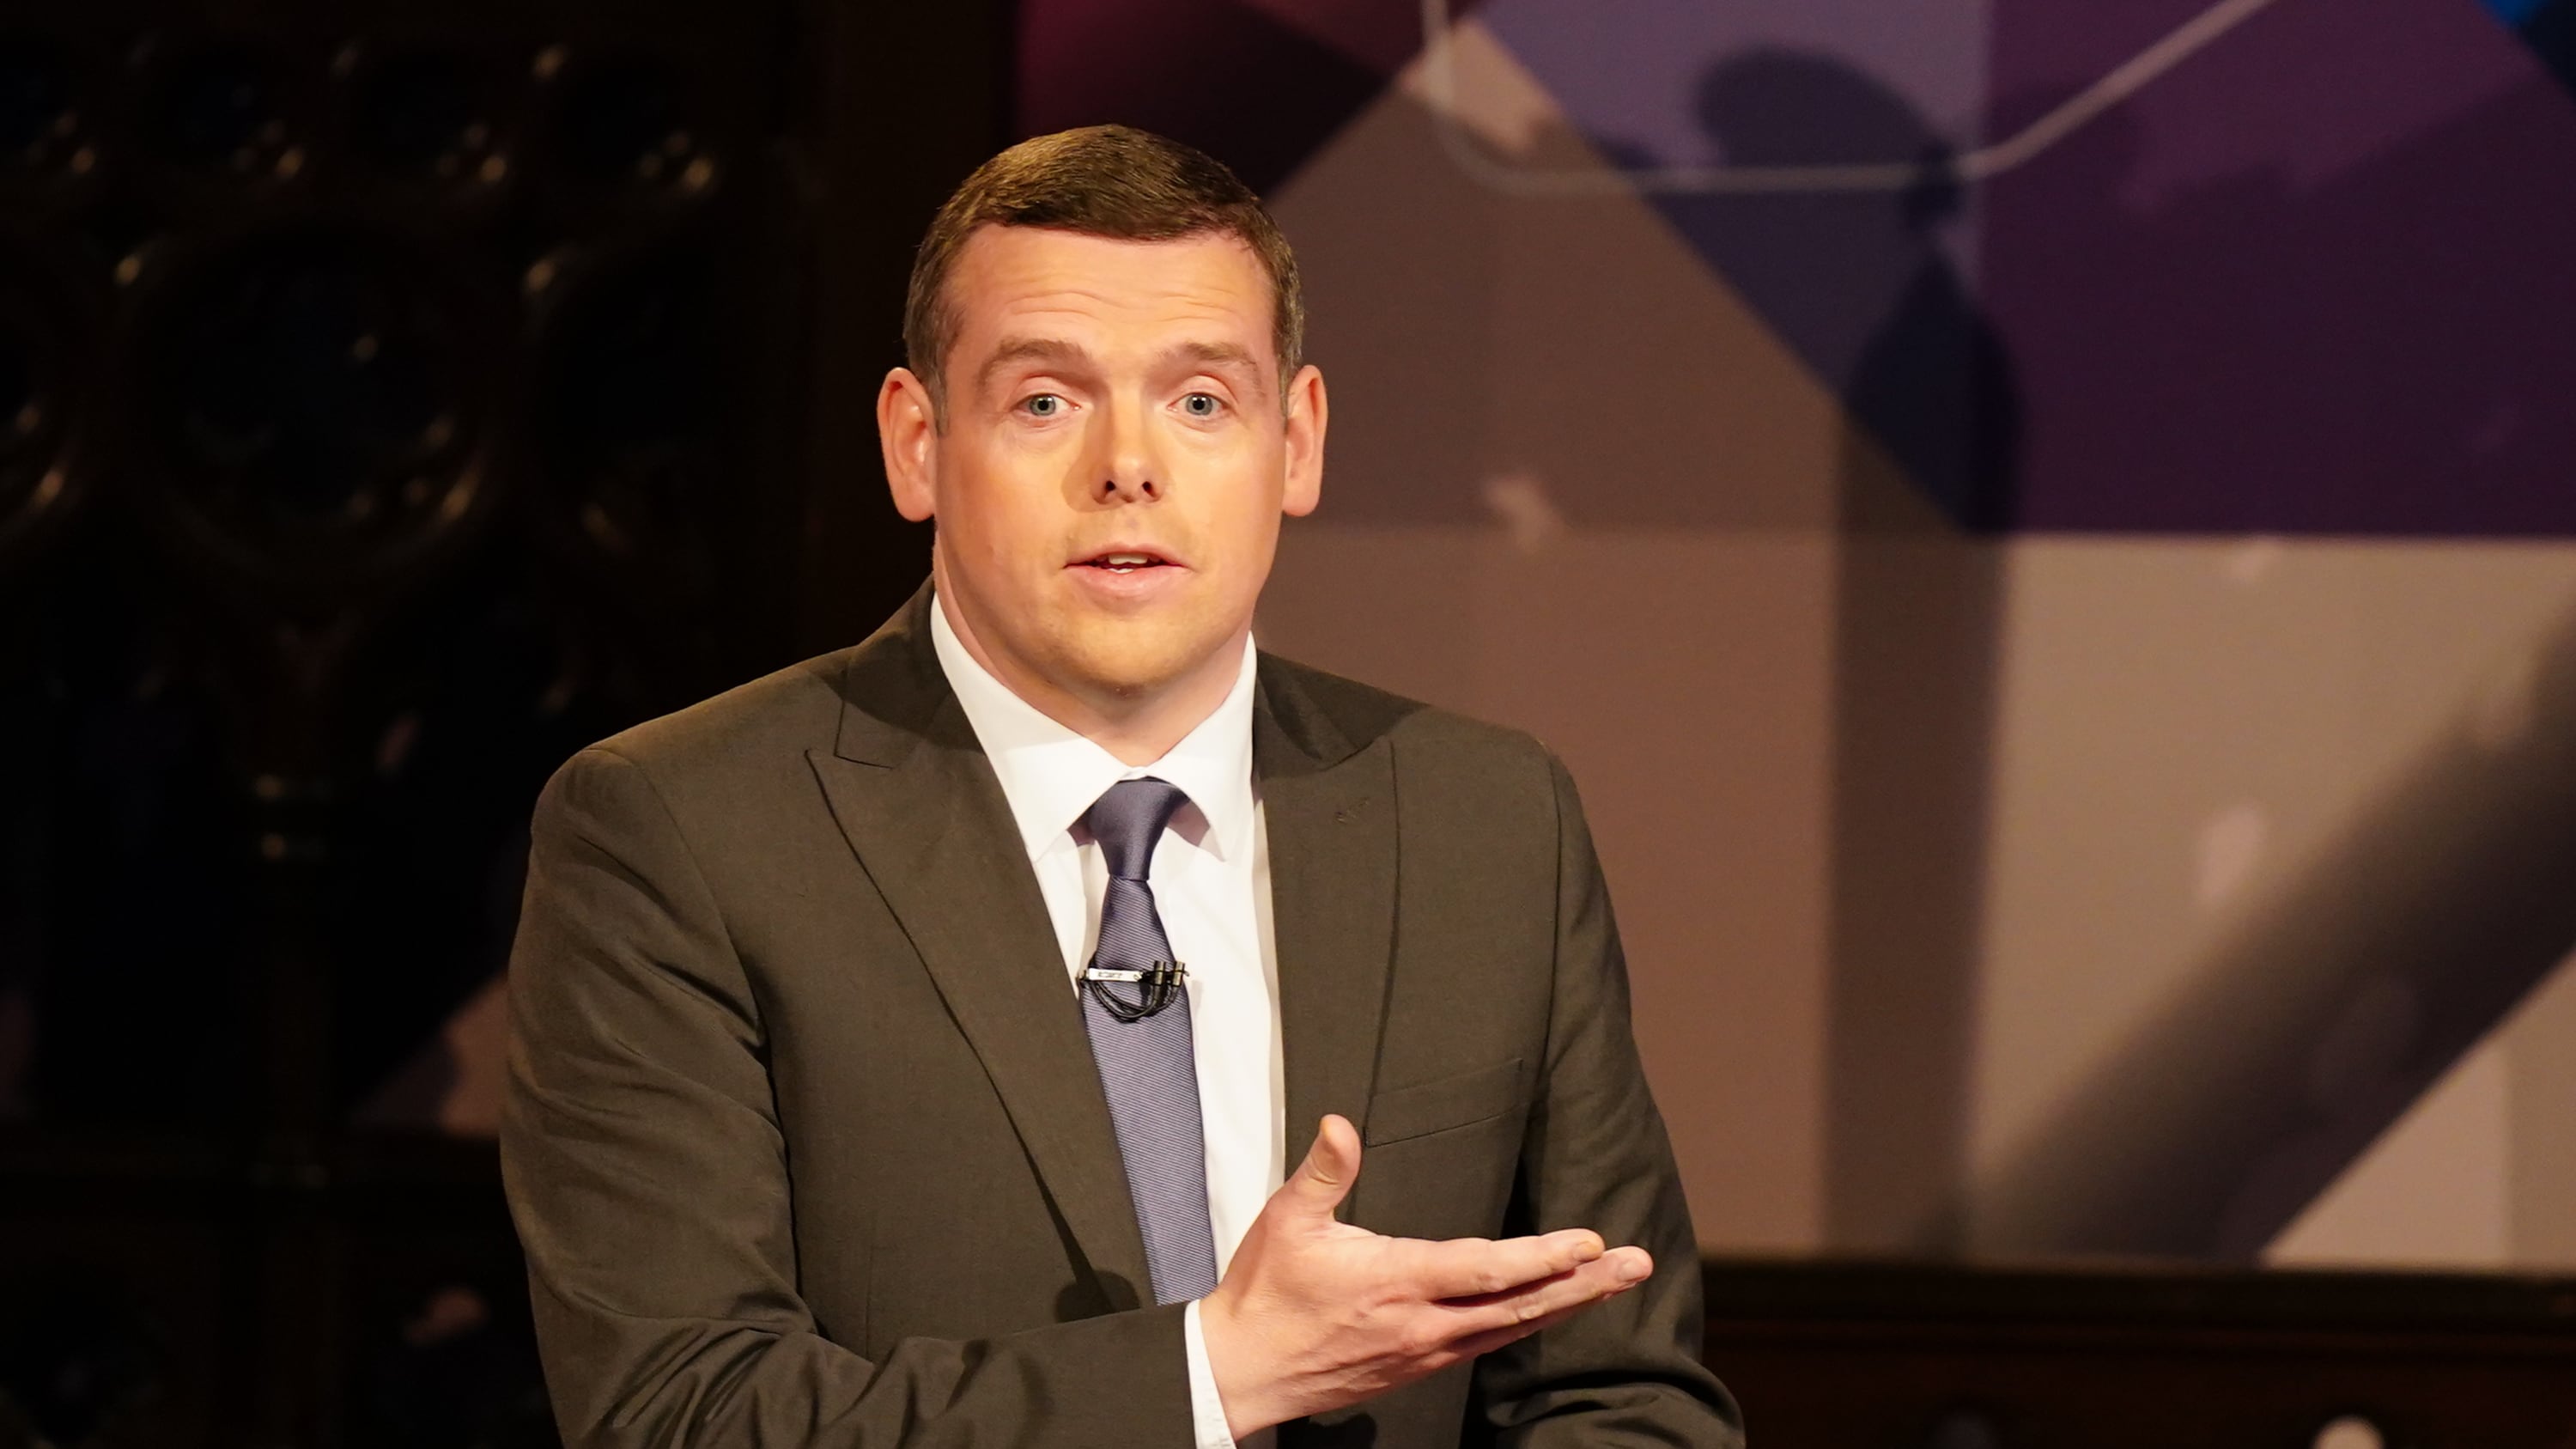 Douglas Ross will stand down as Scottish Conservative leader